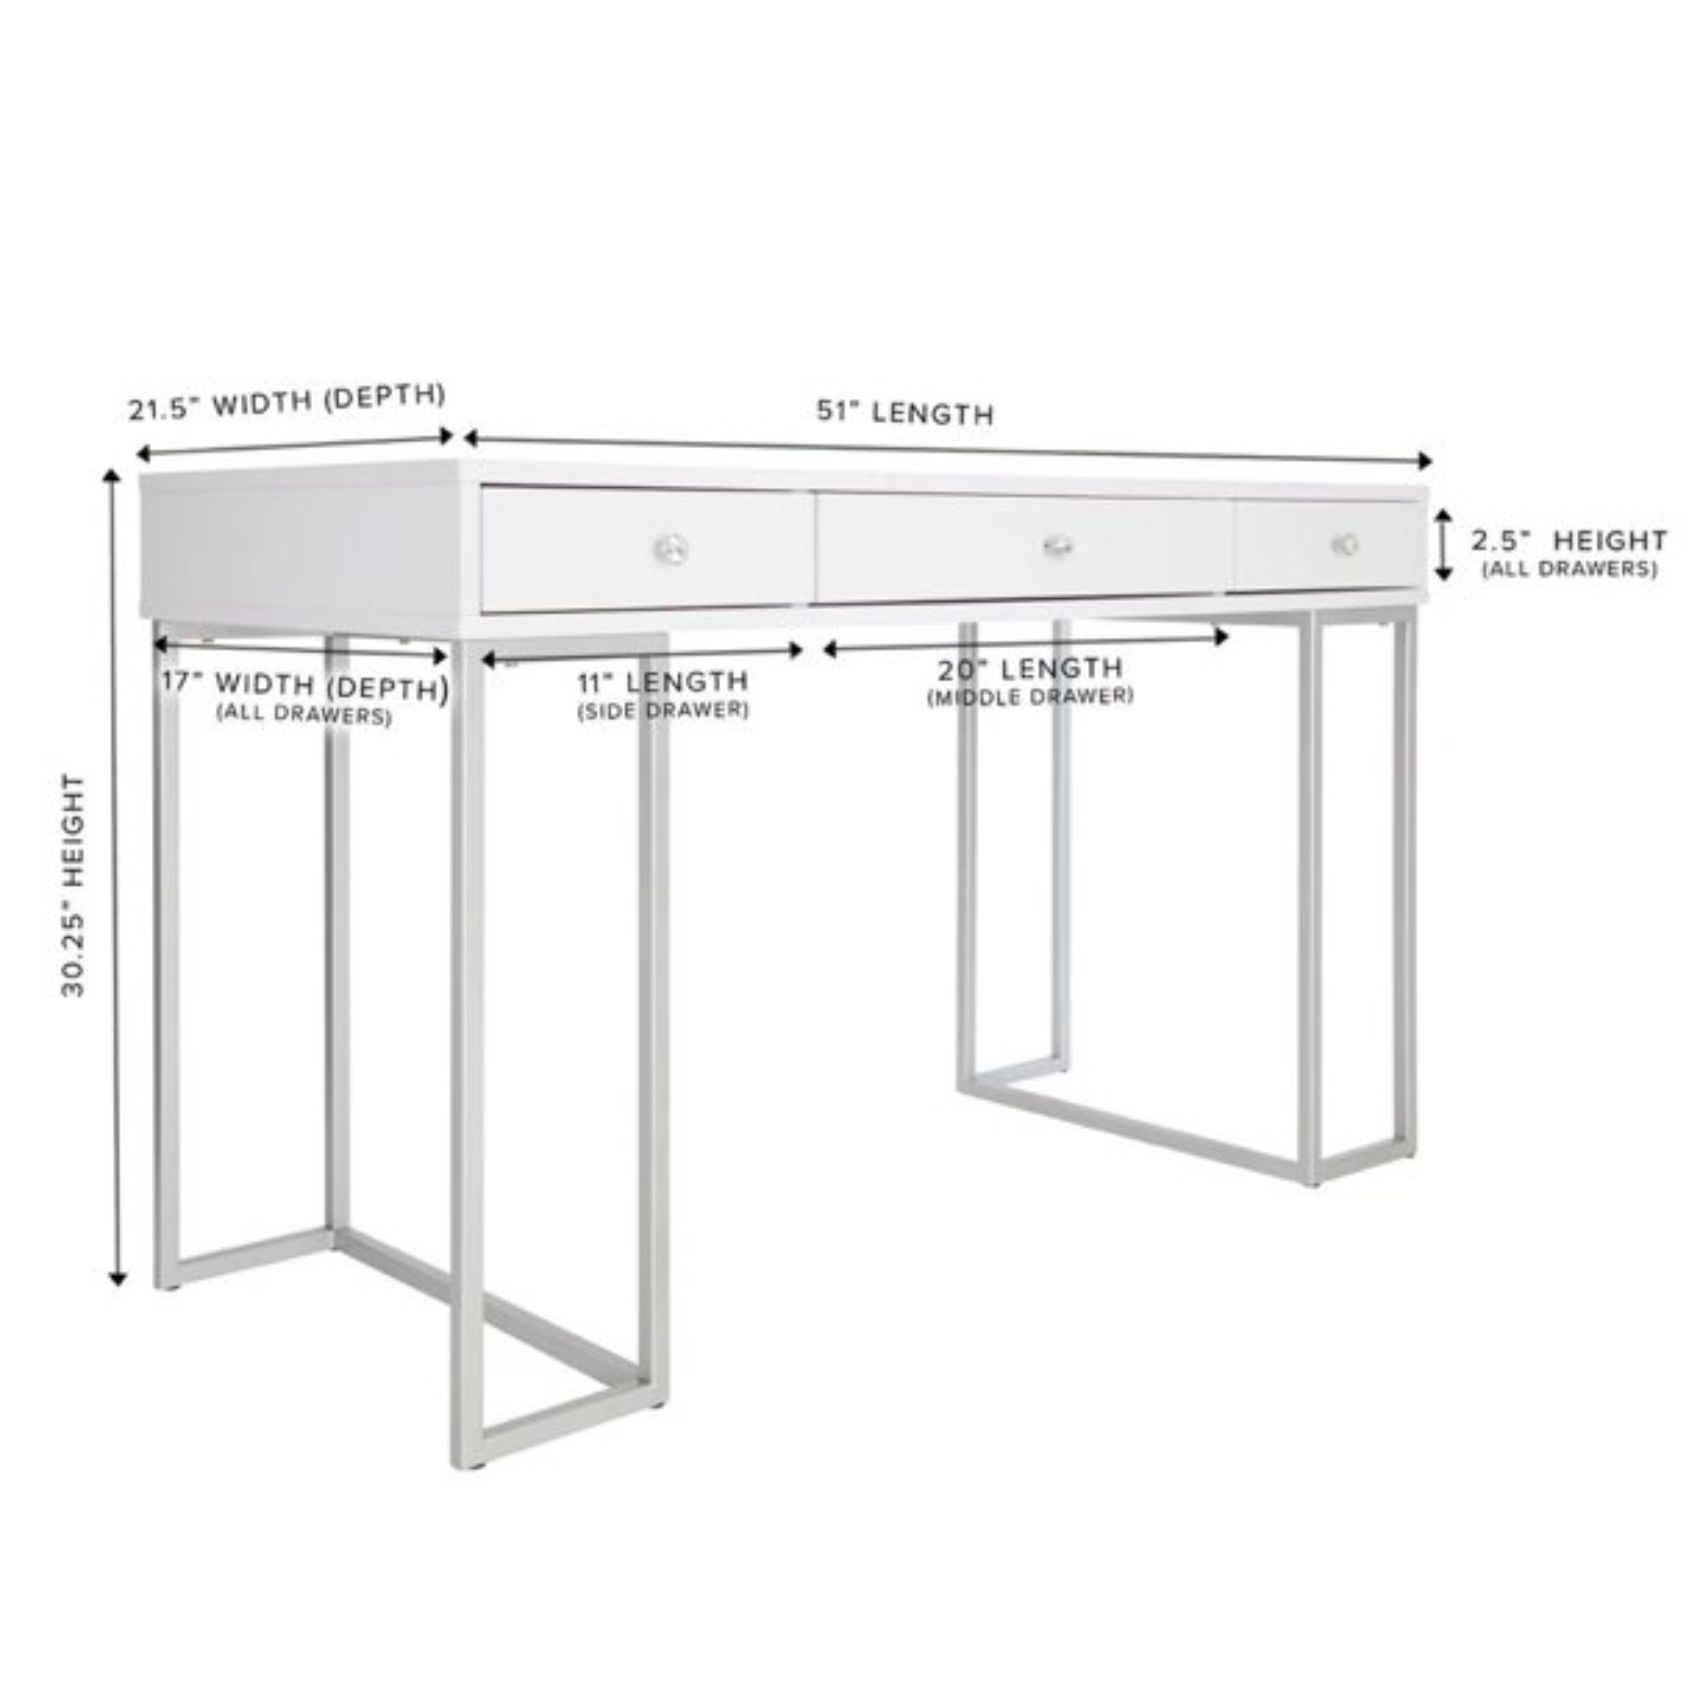 Impressions Vanity Premium Makeup Desk, Celeste Modern Table with 3 Drawers and Crystal Knobs, Perfect for Bedroom Decore (White) - image 2 of 6